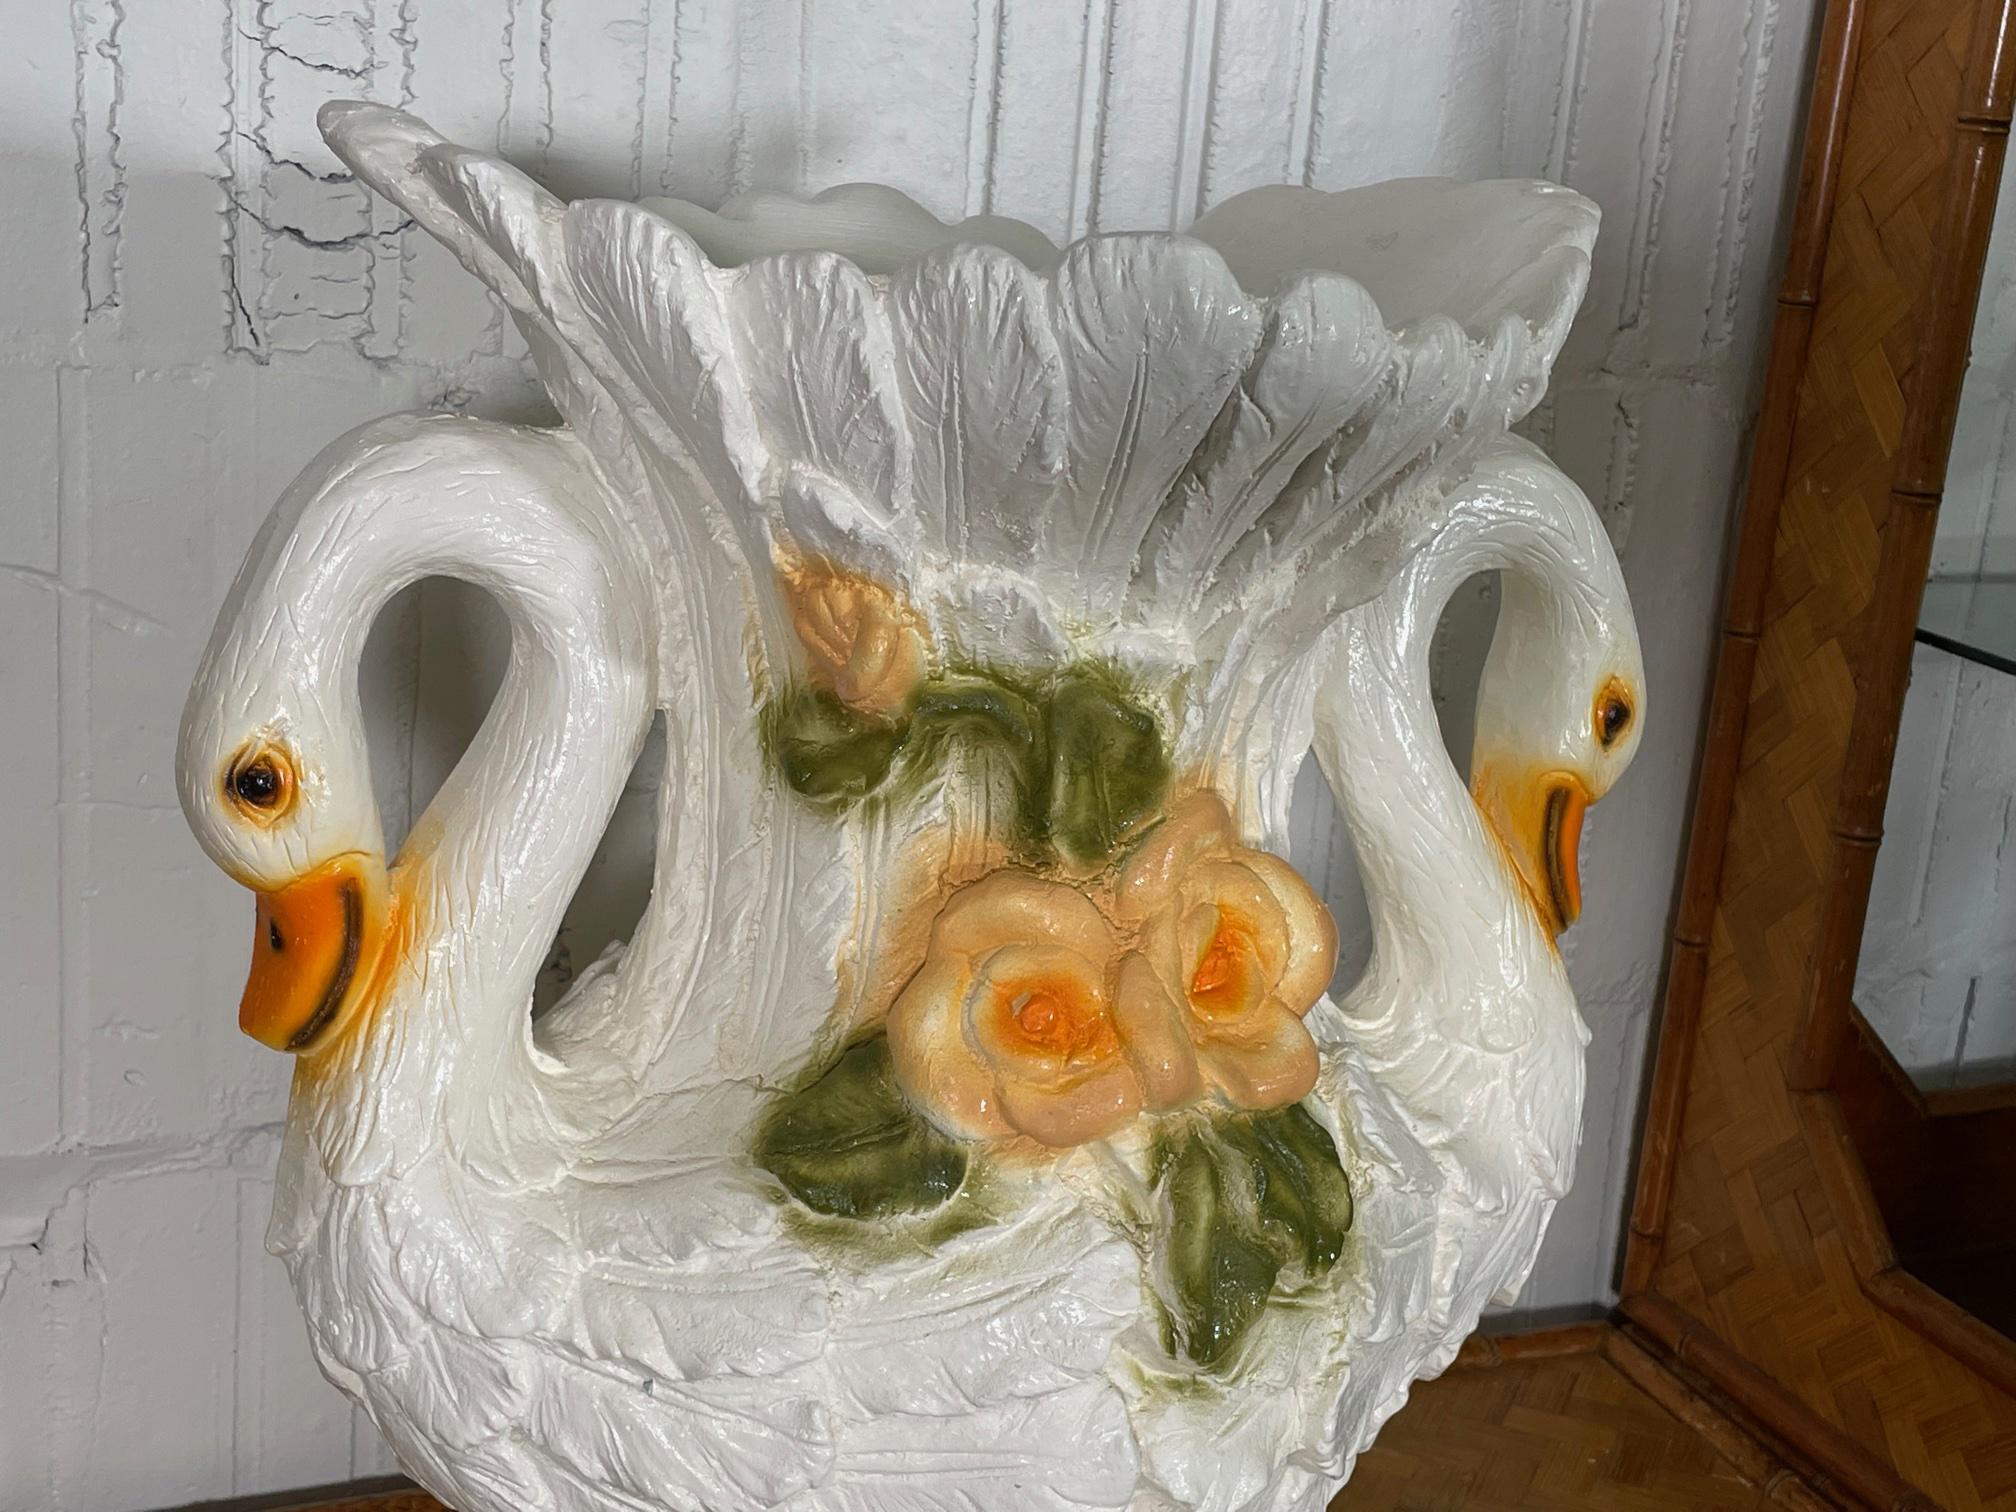 Sculptural Large Double Swan Vase or Planter In Good Condition For Sale In Jacksonville, FL